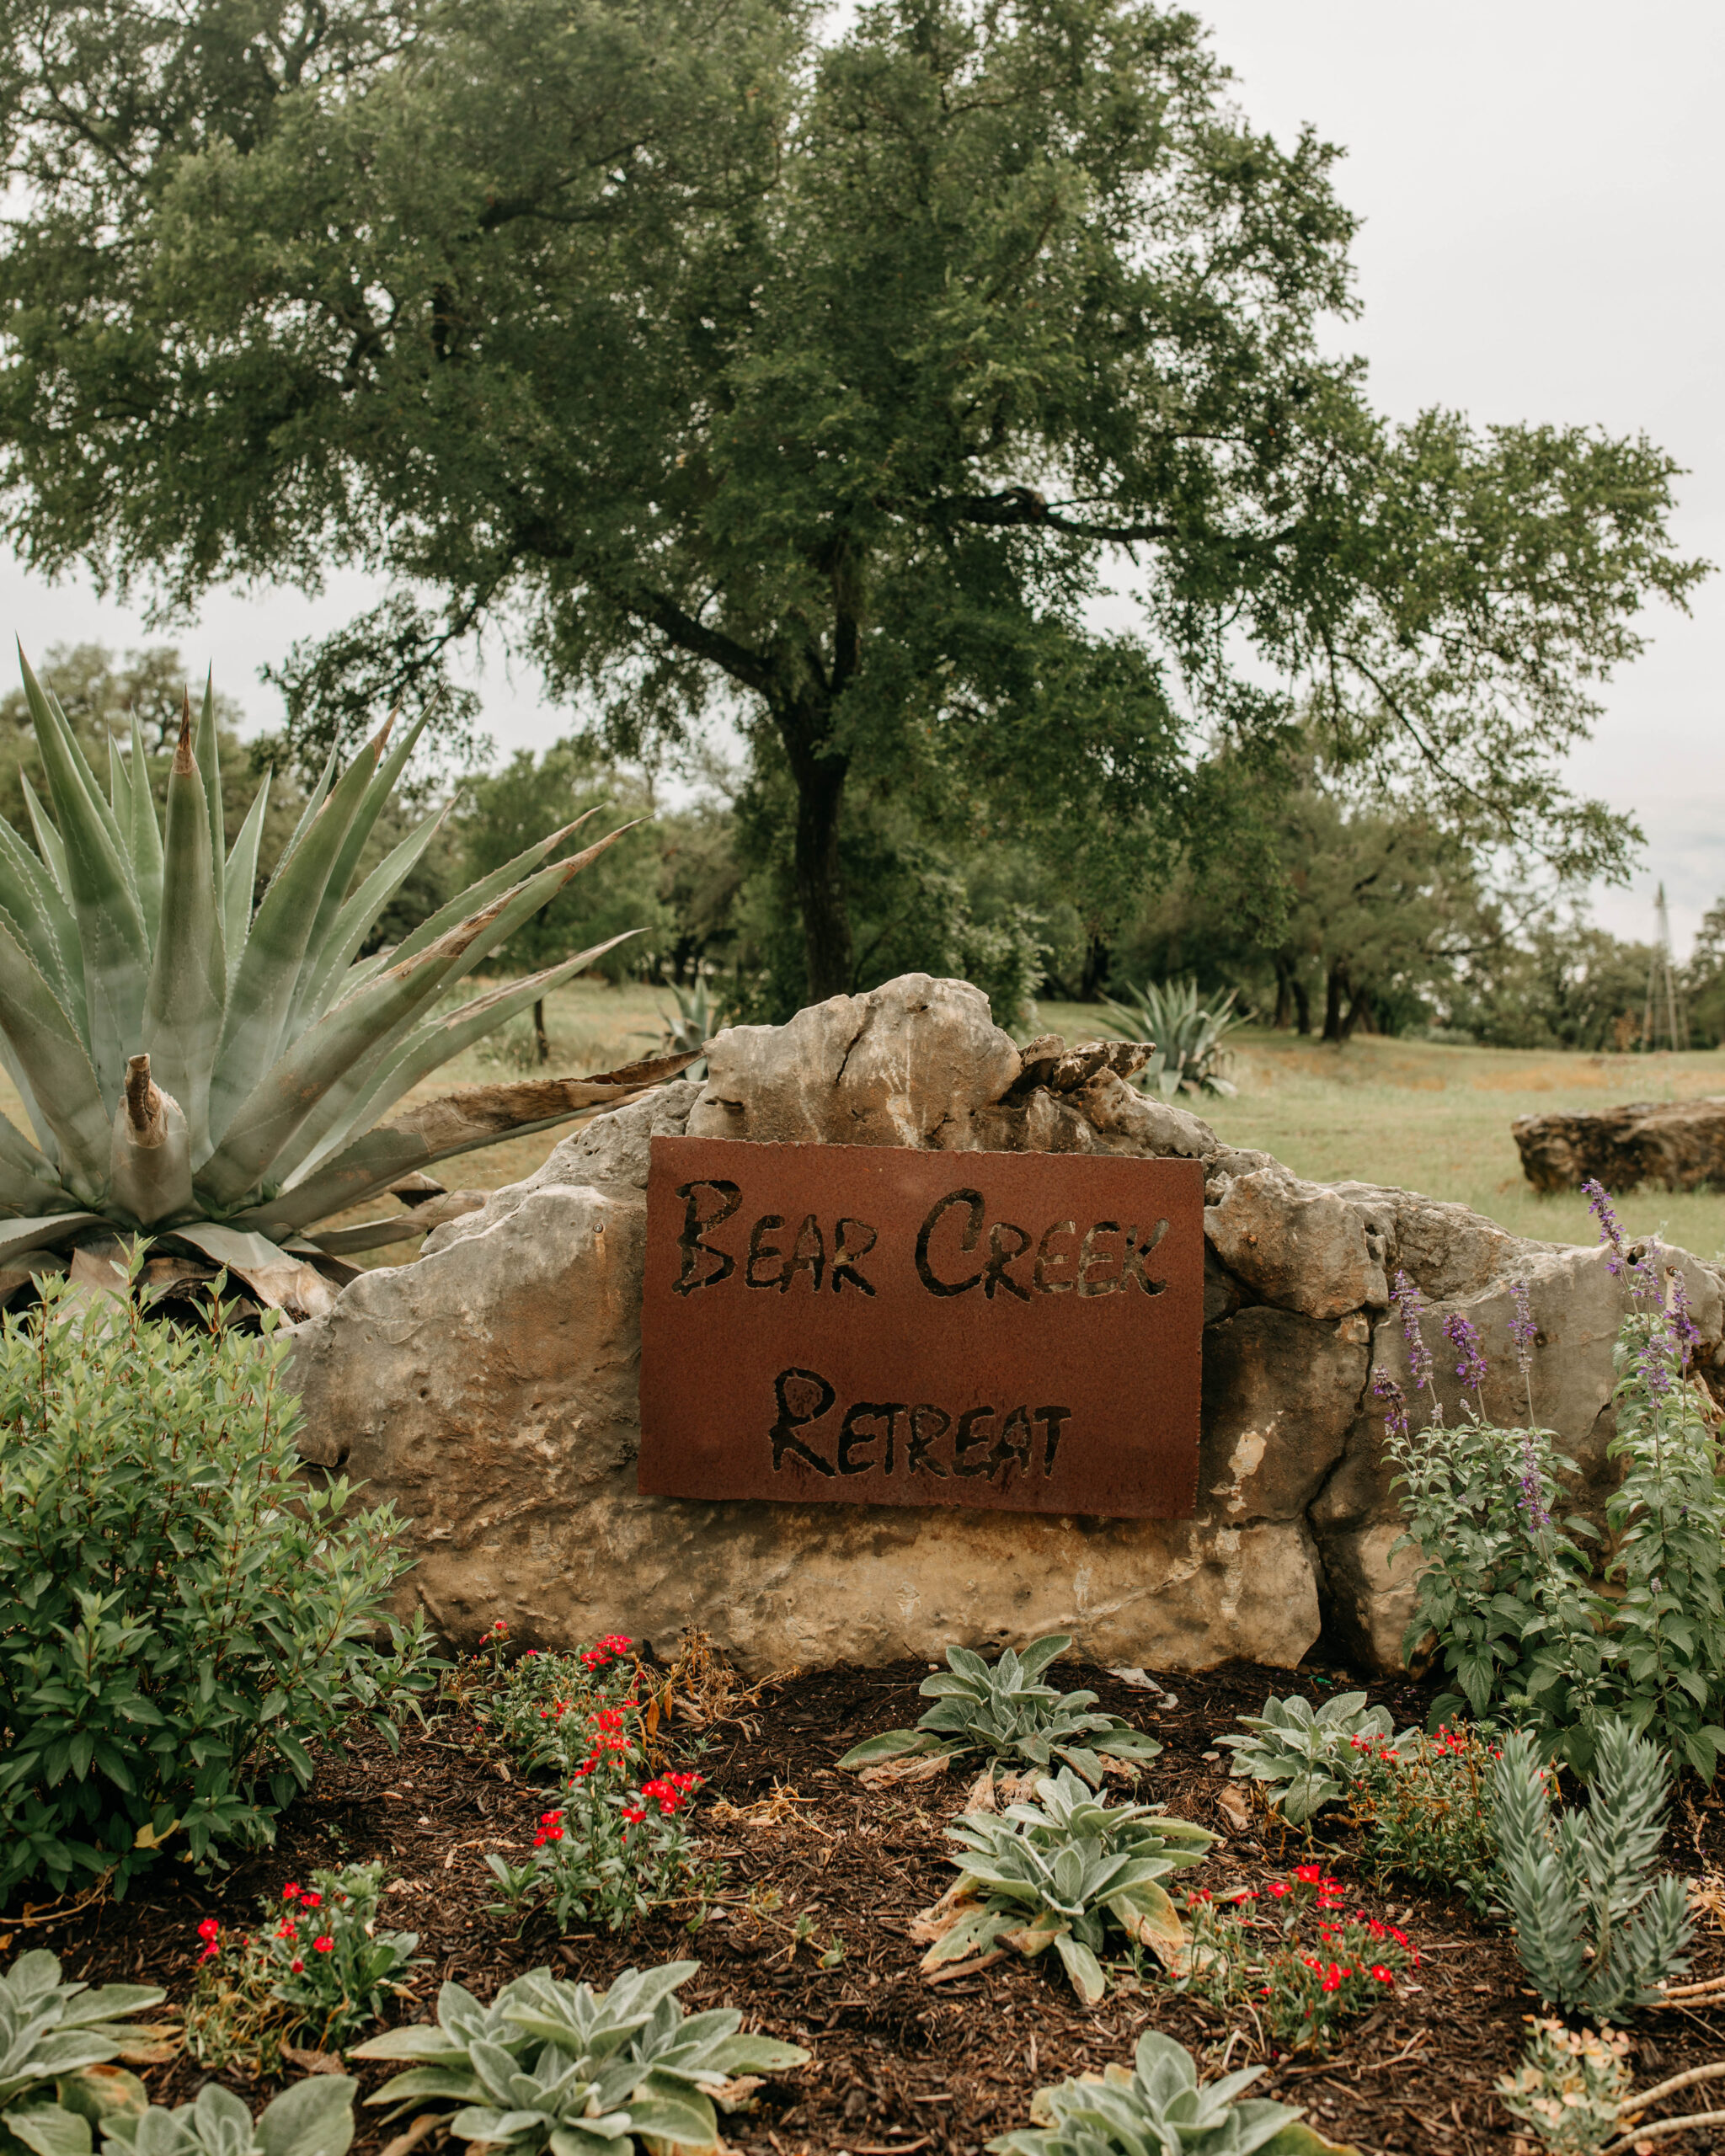 A Photograph of the Bear Creek Retreat signage outside of the Bear Creek Retreat Austin Wedding Venue. Taken on a wedding day in Texas Hill Country.